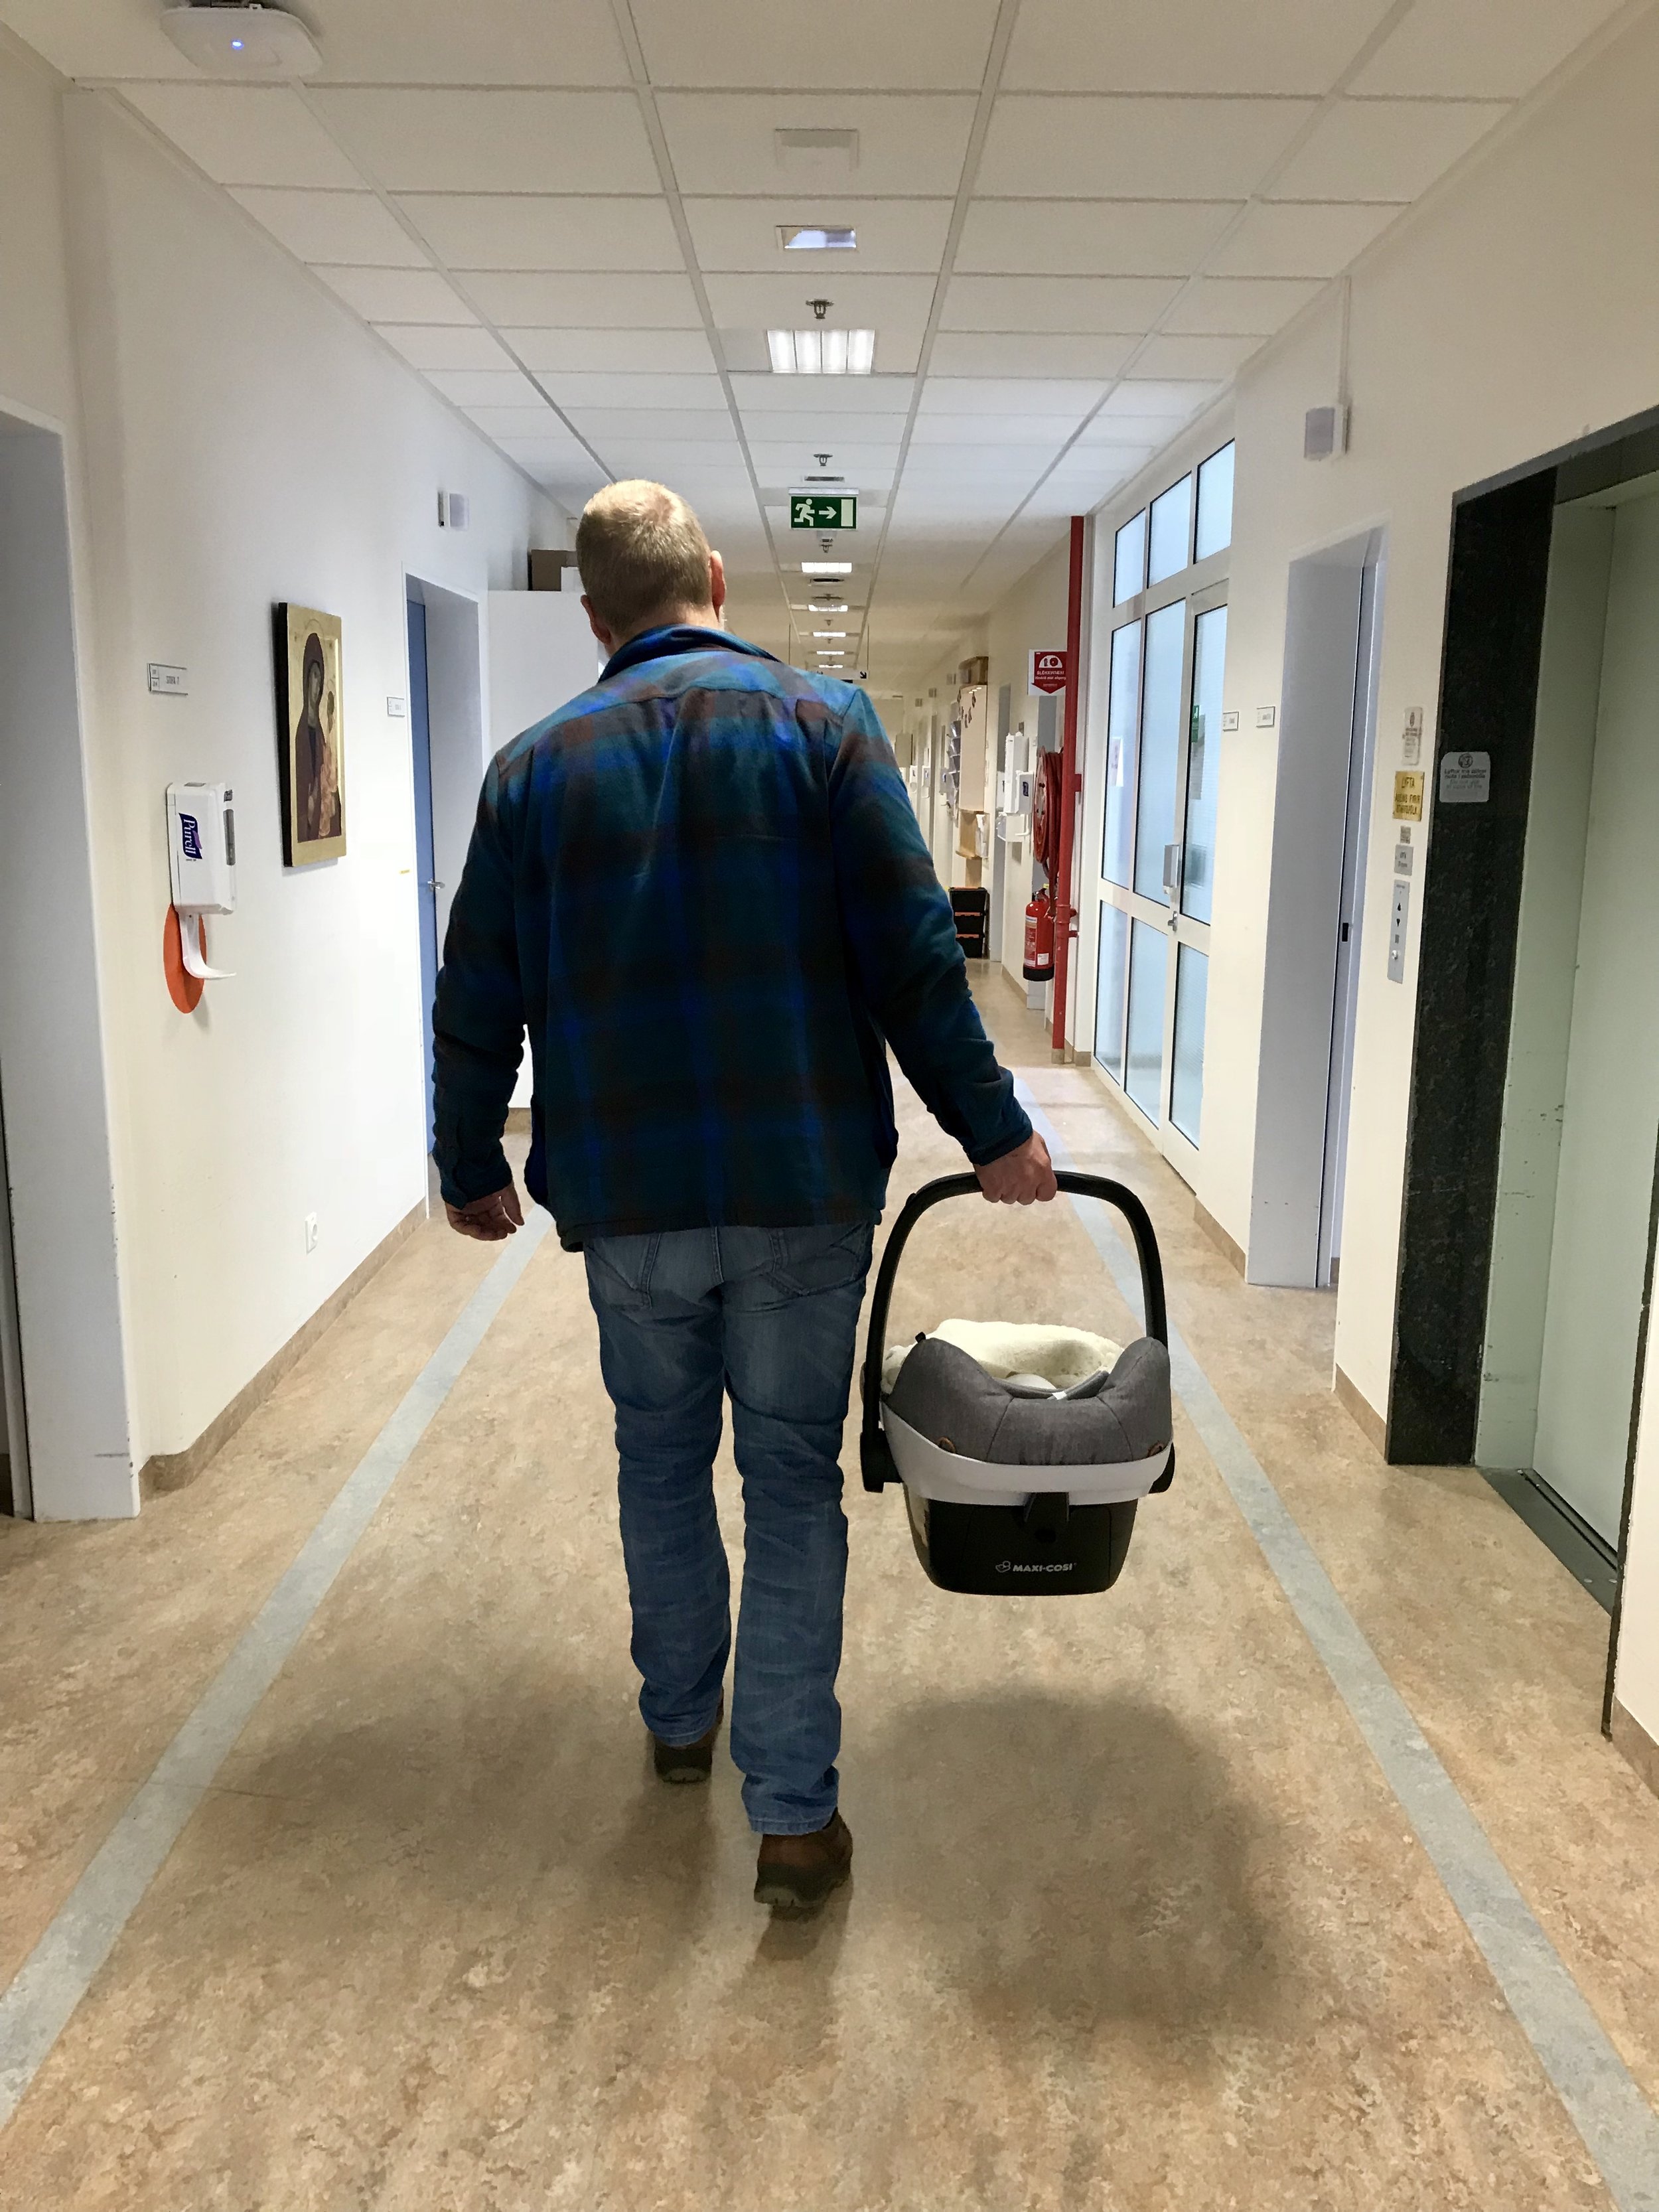 Leaving the delivery ward